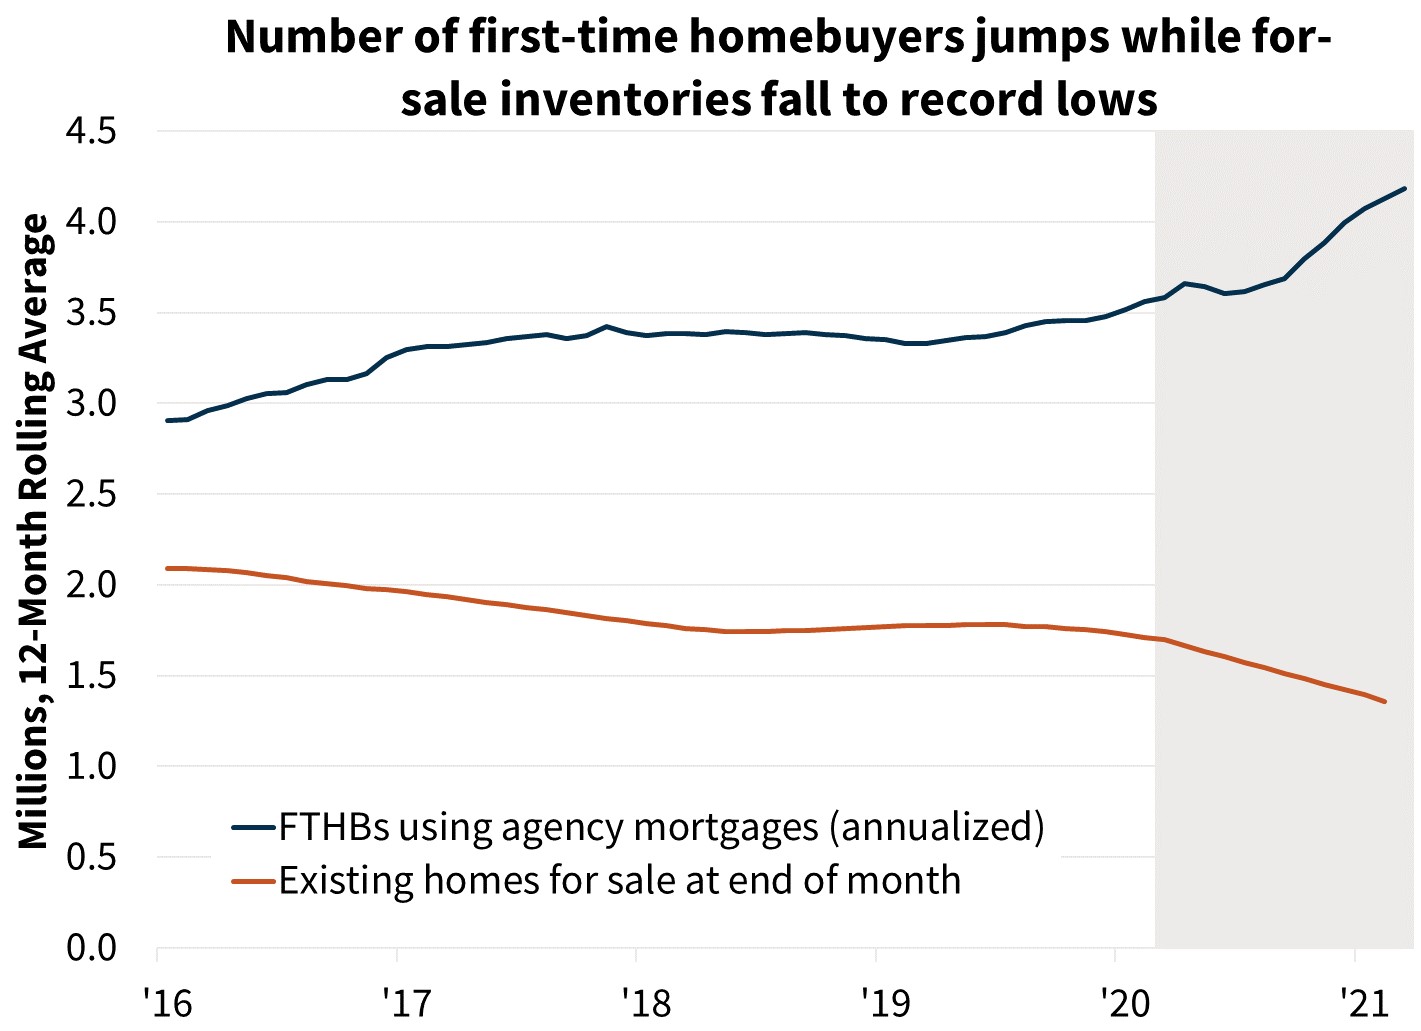  Number of first-time homebuyers jumps while for-sale inventories fall to record lows
